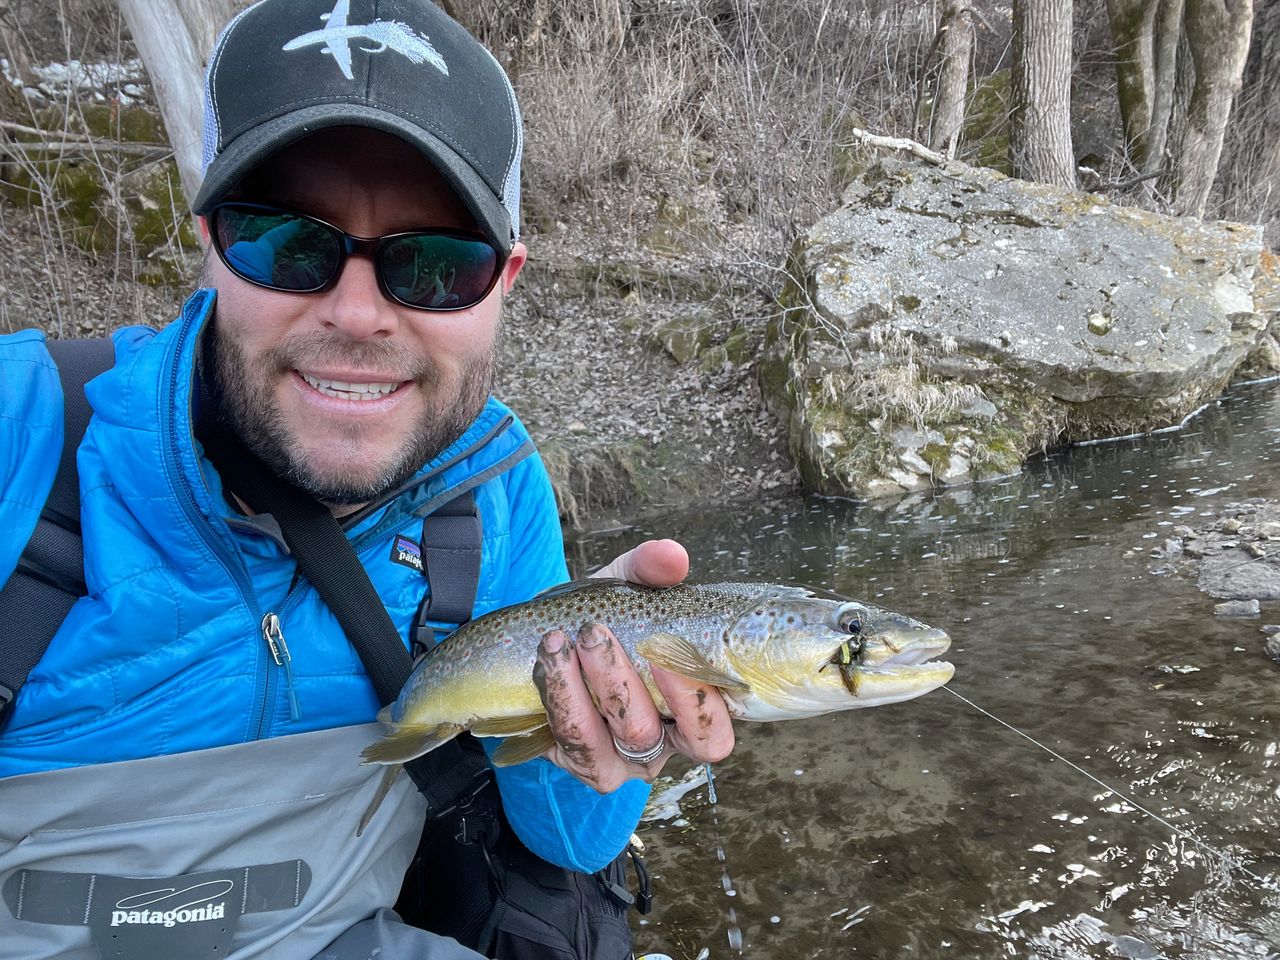 Streamer Fishing for Brown Trout on The White River in Arkansas